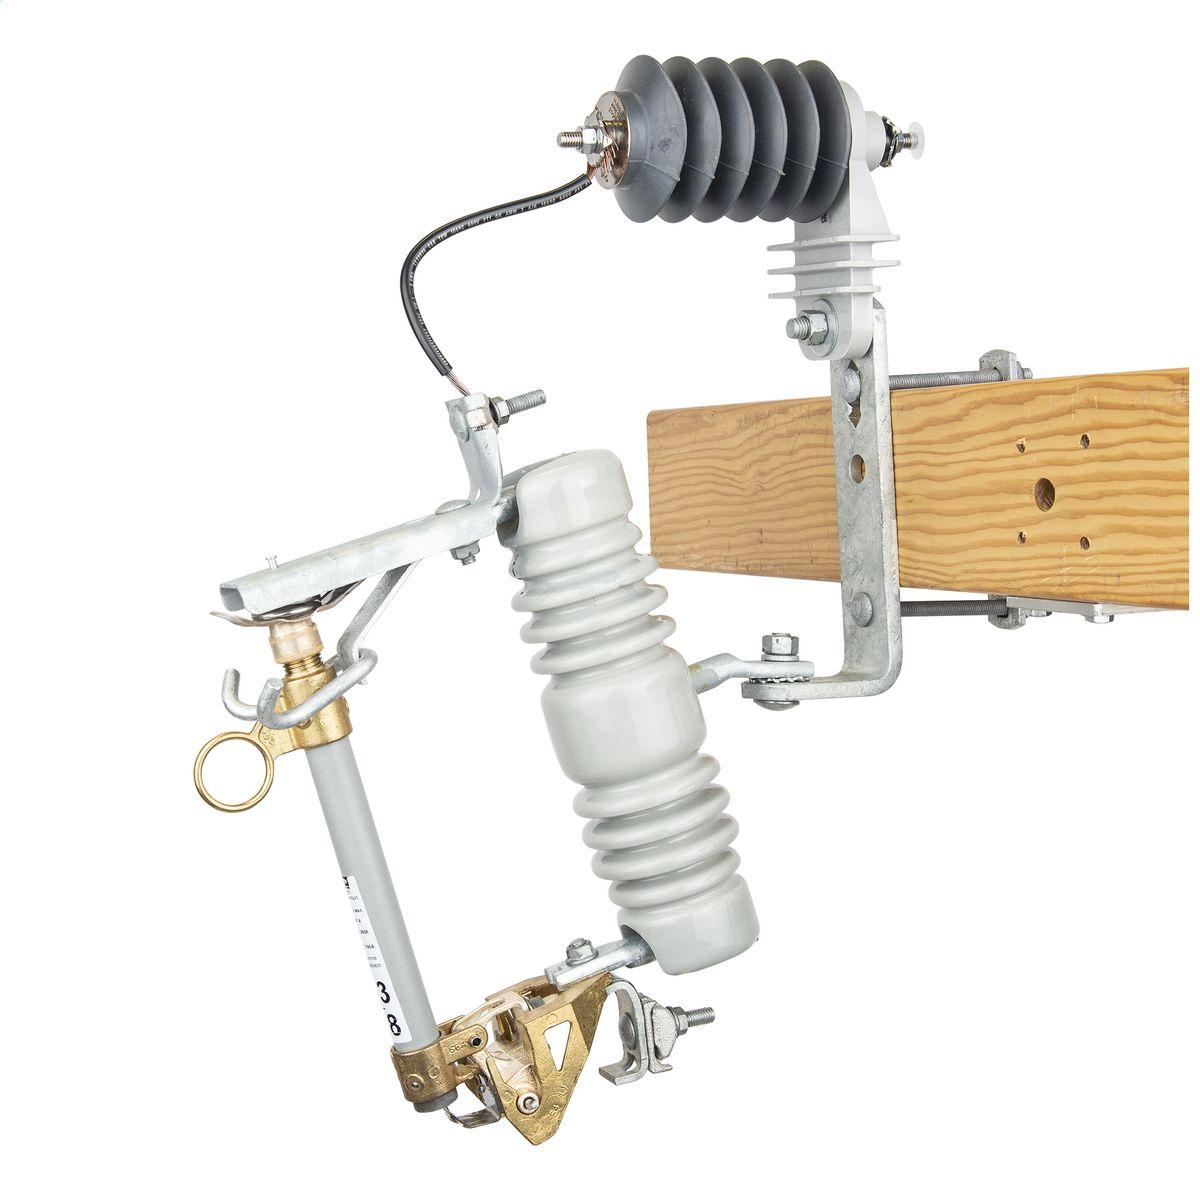 Hubbell C71DL143ED 15 kV, 110 kV BIL, Standard Type C Porcelain Cutout / Arrester Combination with a 200A, 12kAIC fuseholder, small eyebolt connector and a D-shape pole mounting bracket. 